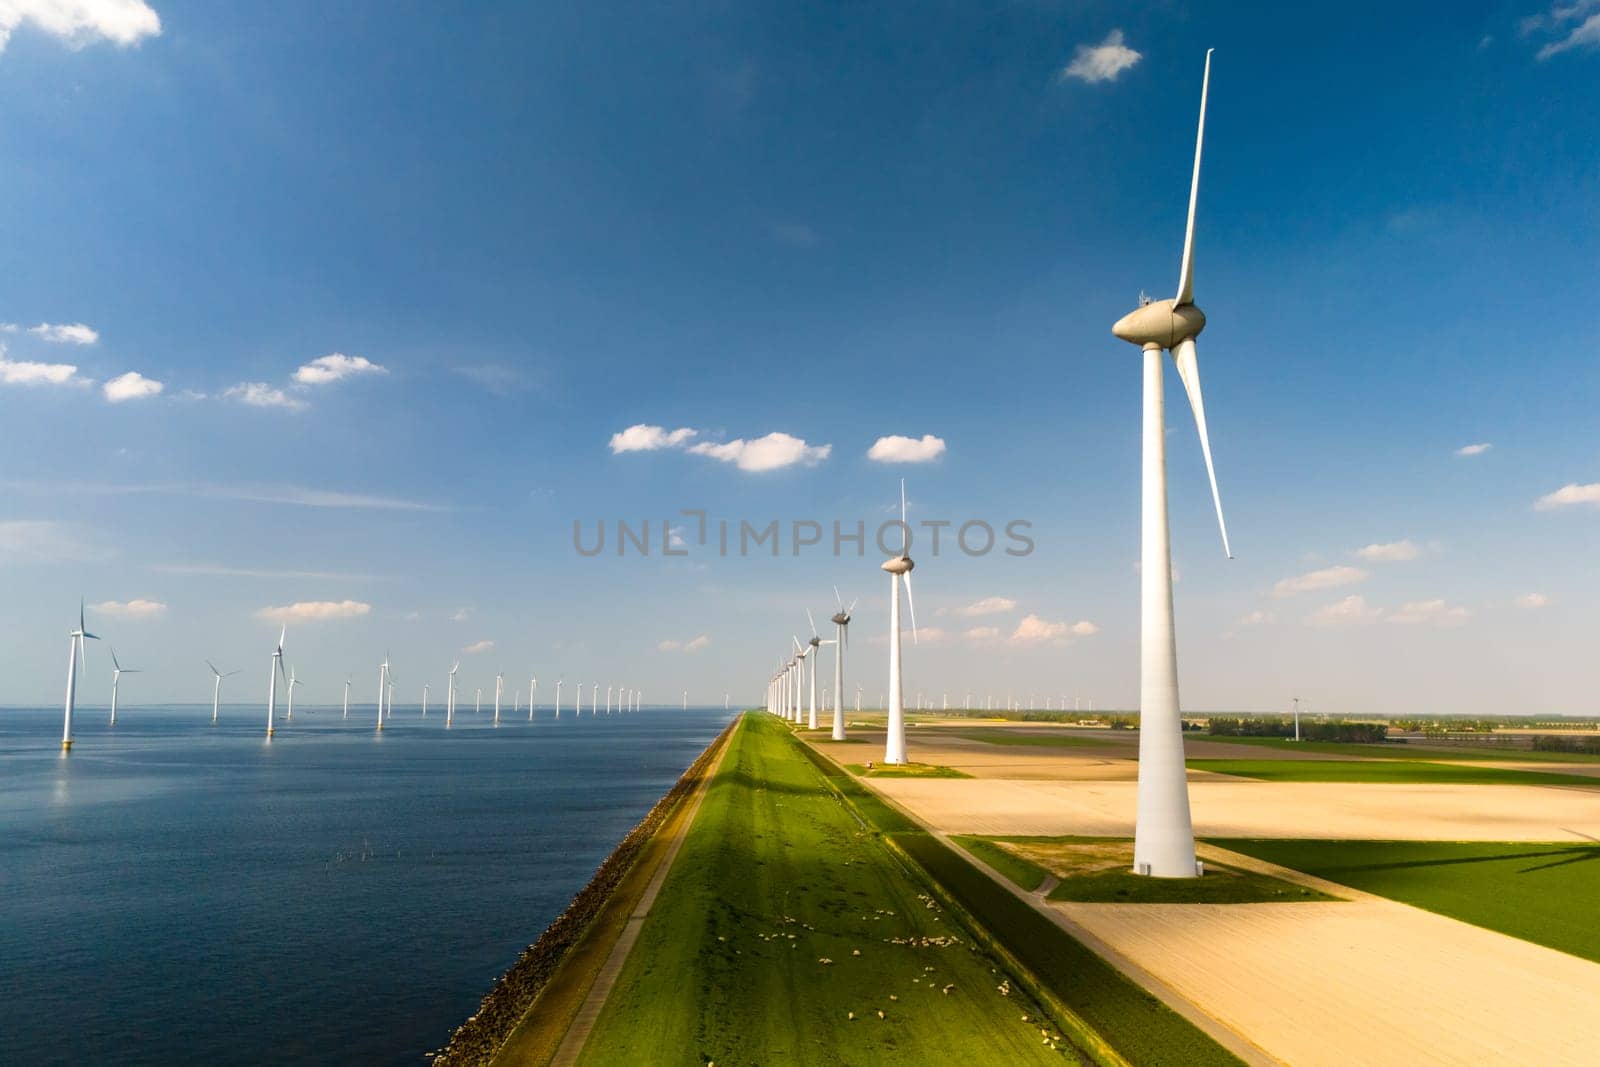 A row of elegant wind turbines stand tall next to a serene body of water, harnessing the power of the wind to generate renewable energy by fokkebok